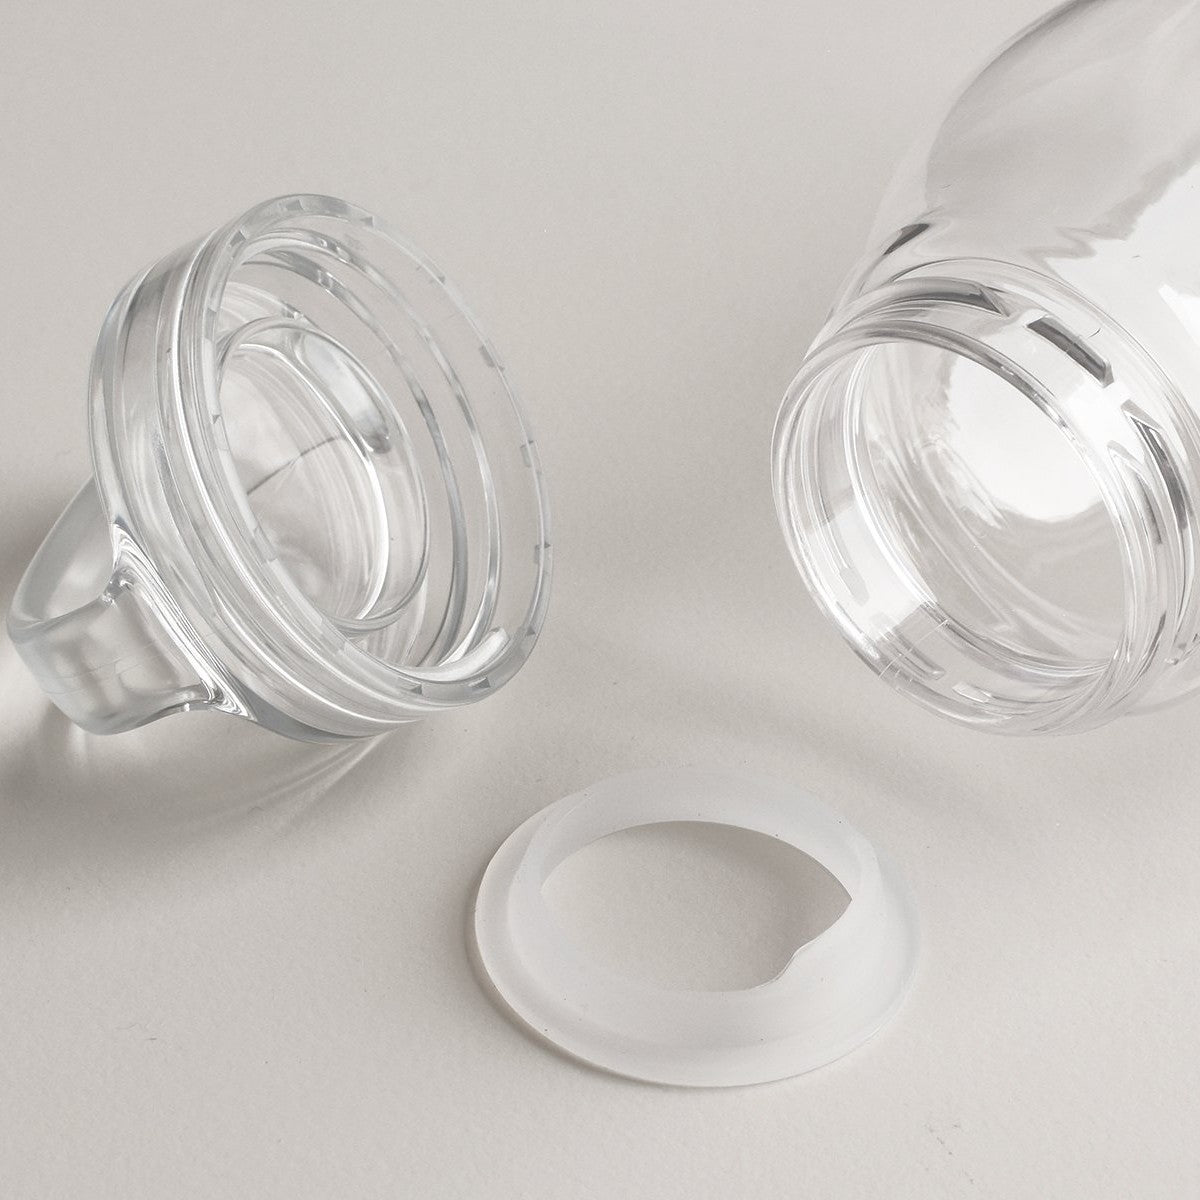 KINTO WATER BOTTLE SILICONE RING SET OF 2 CLEAR THUMBNAIL 1